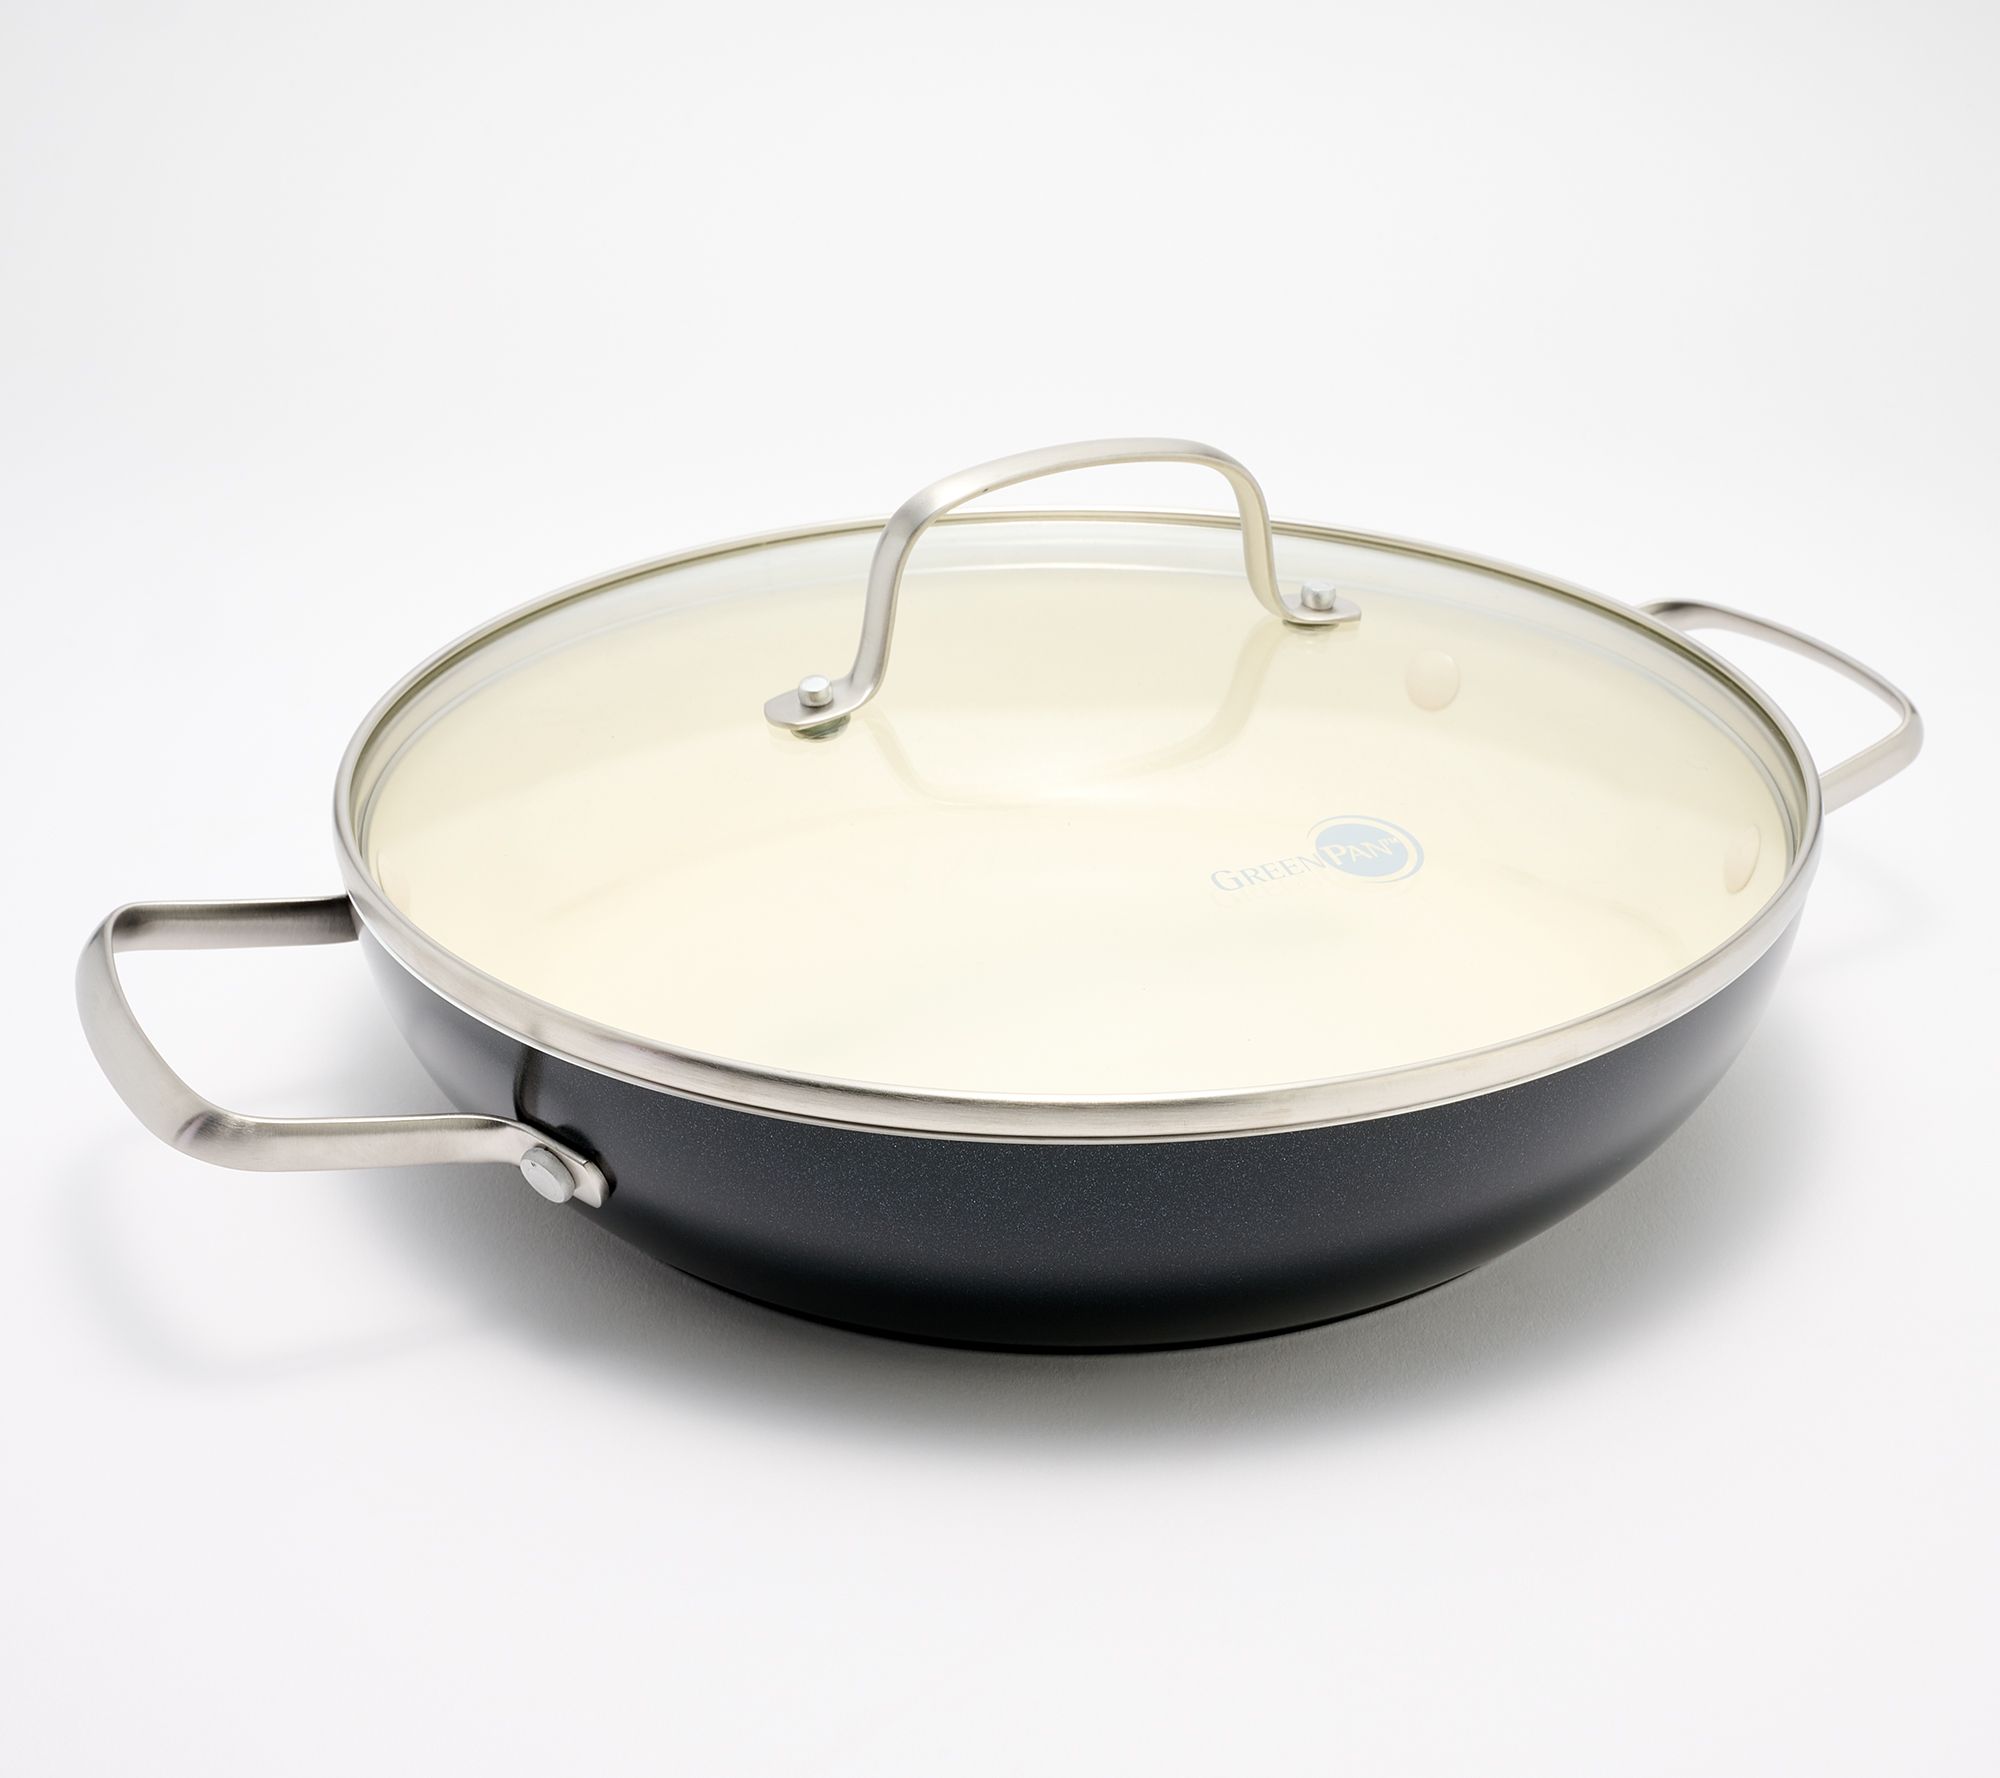 Greendi YMX8324 Nonstick Frying Pan Non Stick Skillet with Glass